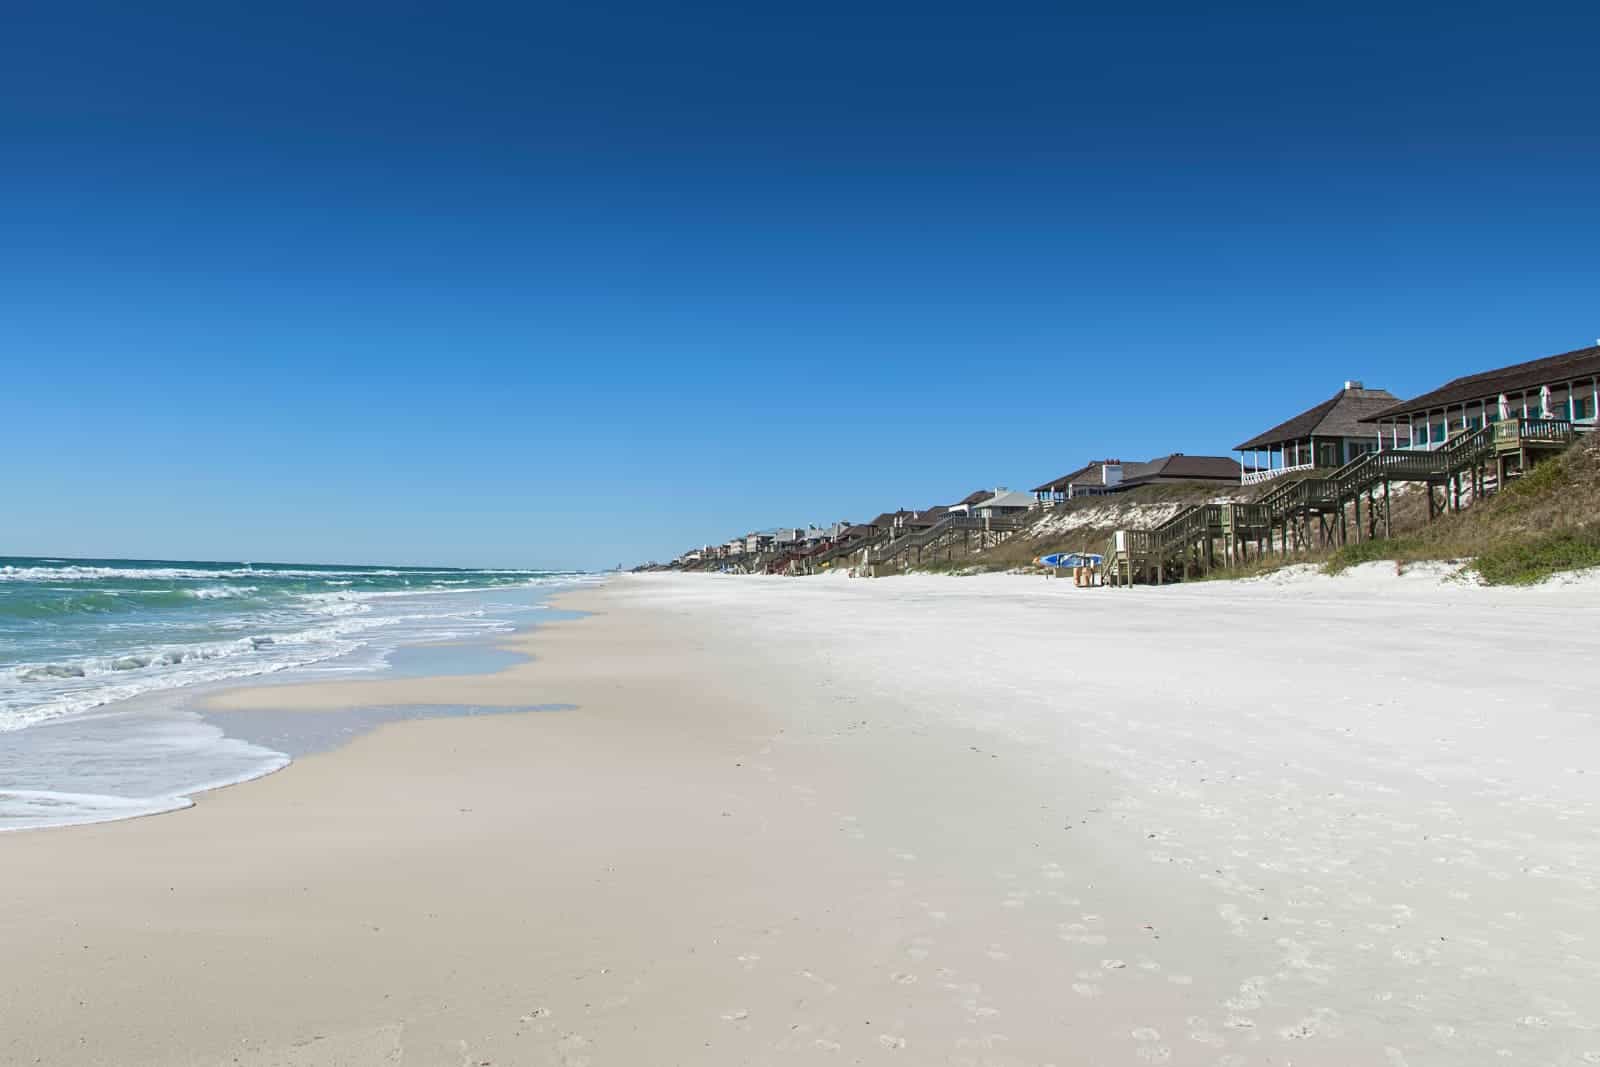 View of Rosemary Beach on 30A Florida with ocean waves on the left, sand in the middle, row of villas on the right. Sky covers top half of the picture and is royal blue.